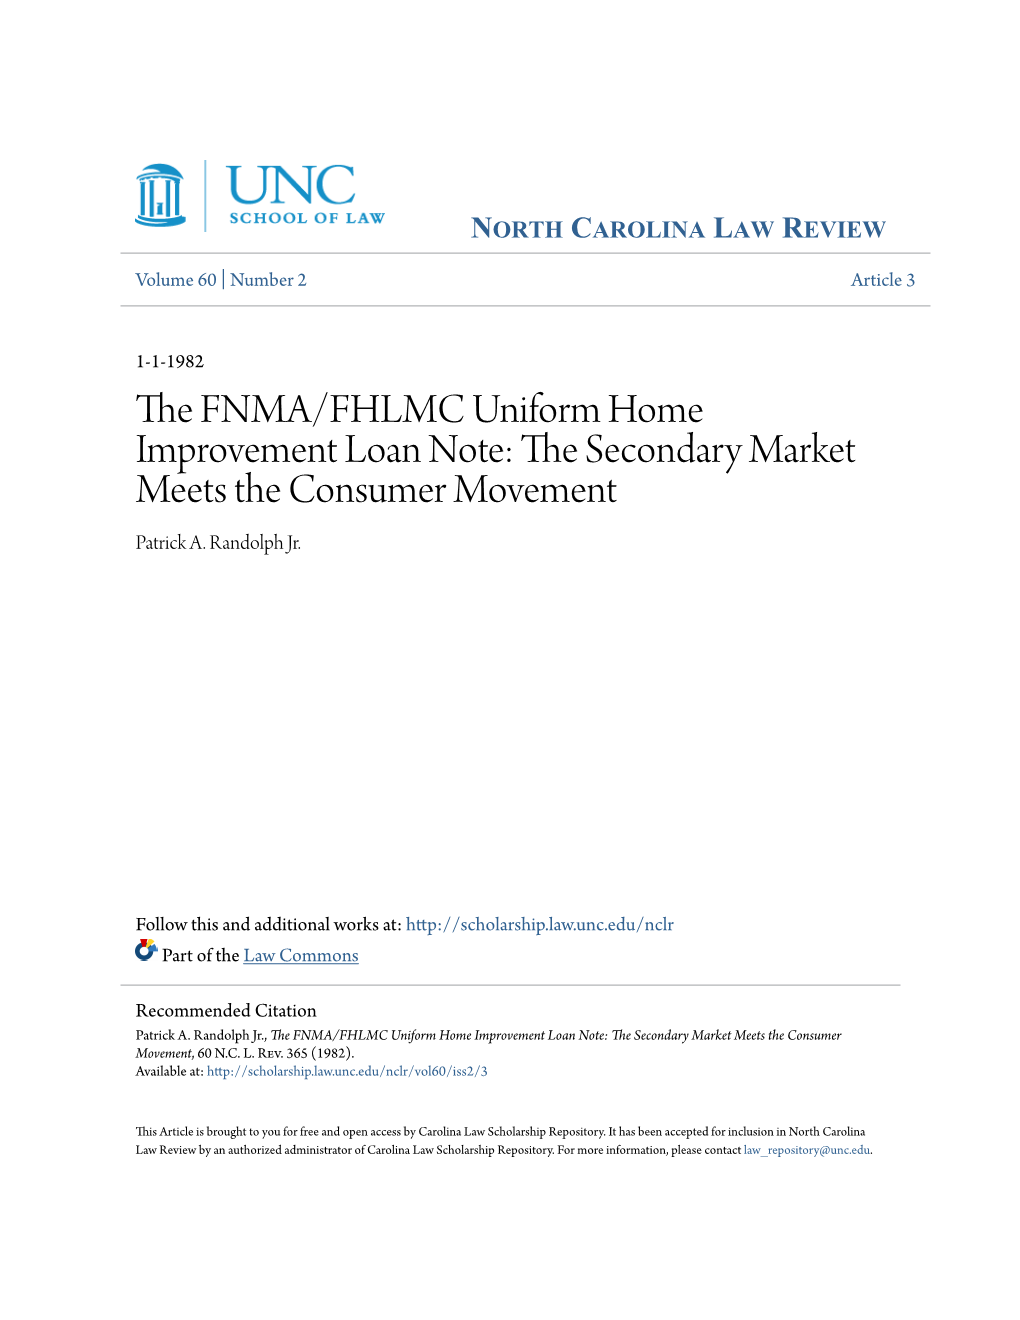 The FNMA/FHLMC Uniform Home Improvement Loan Note: the Econds Ary Market Meets the Consumer Movement Patrick A